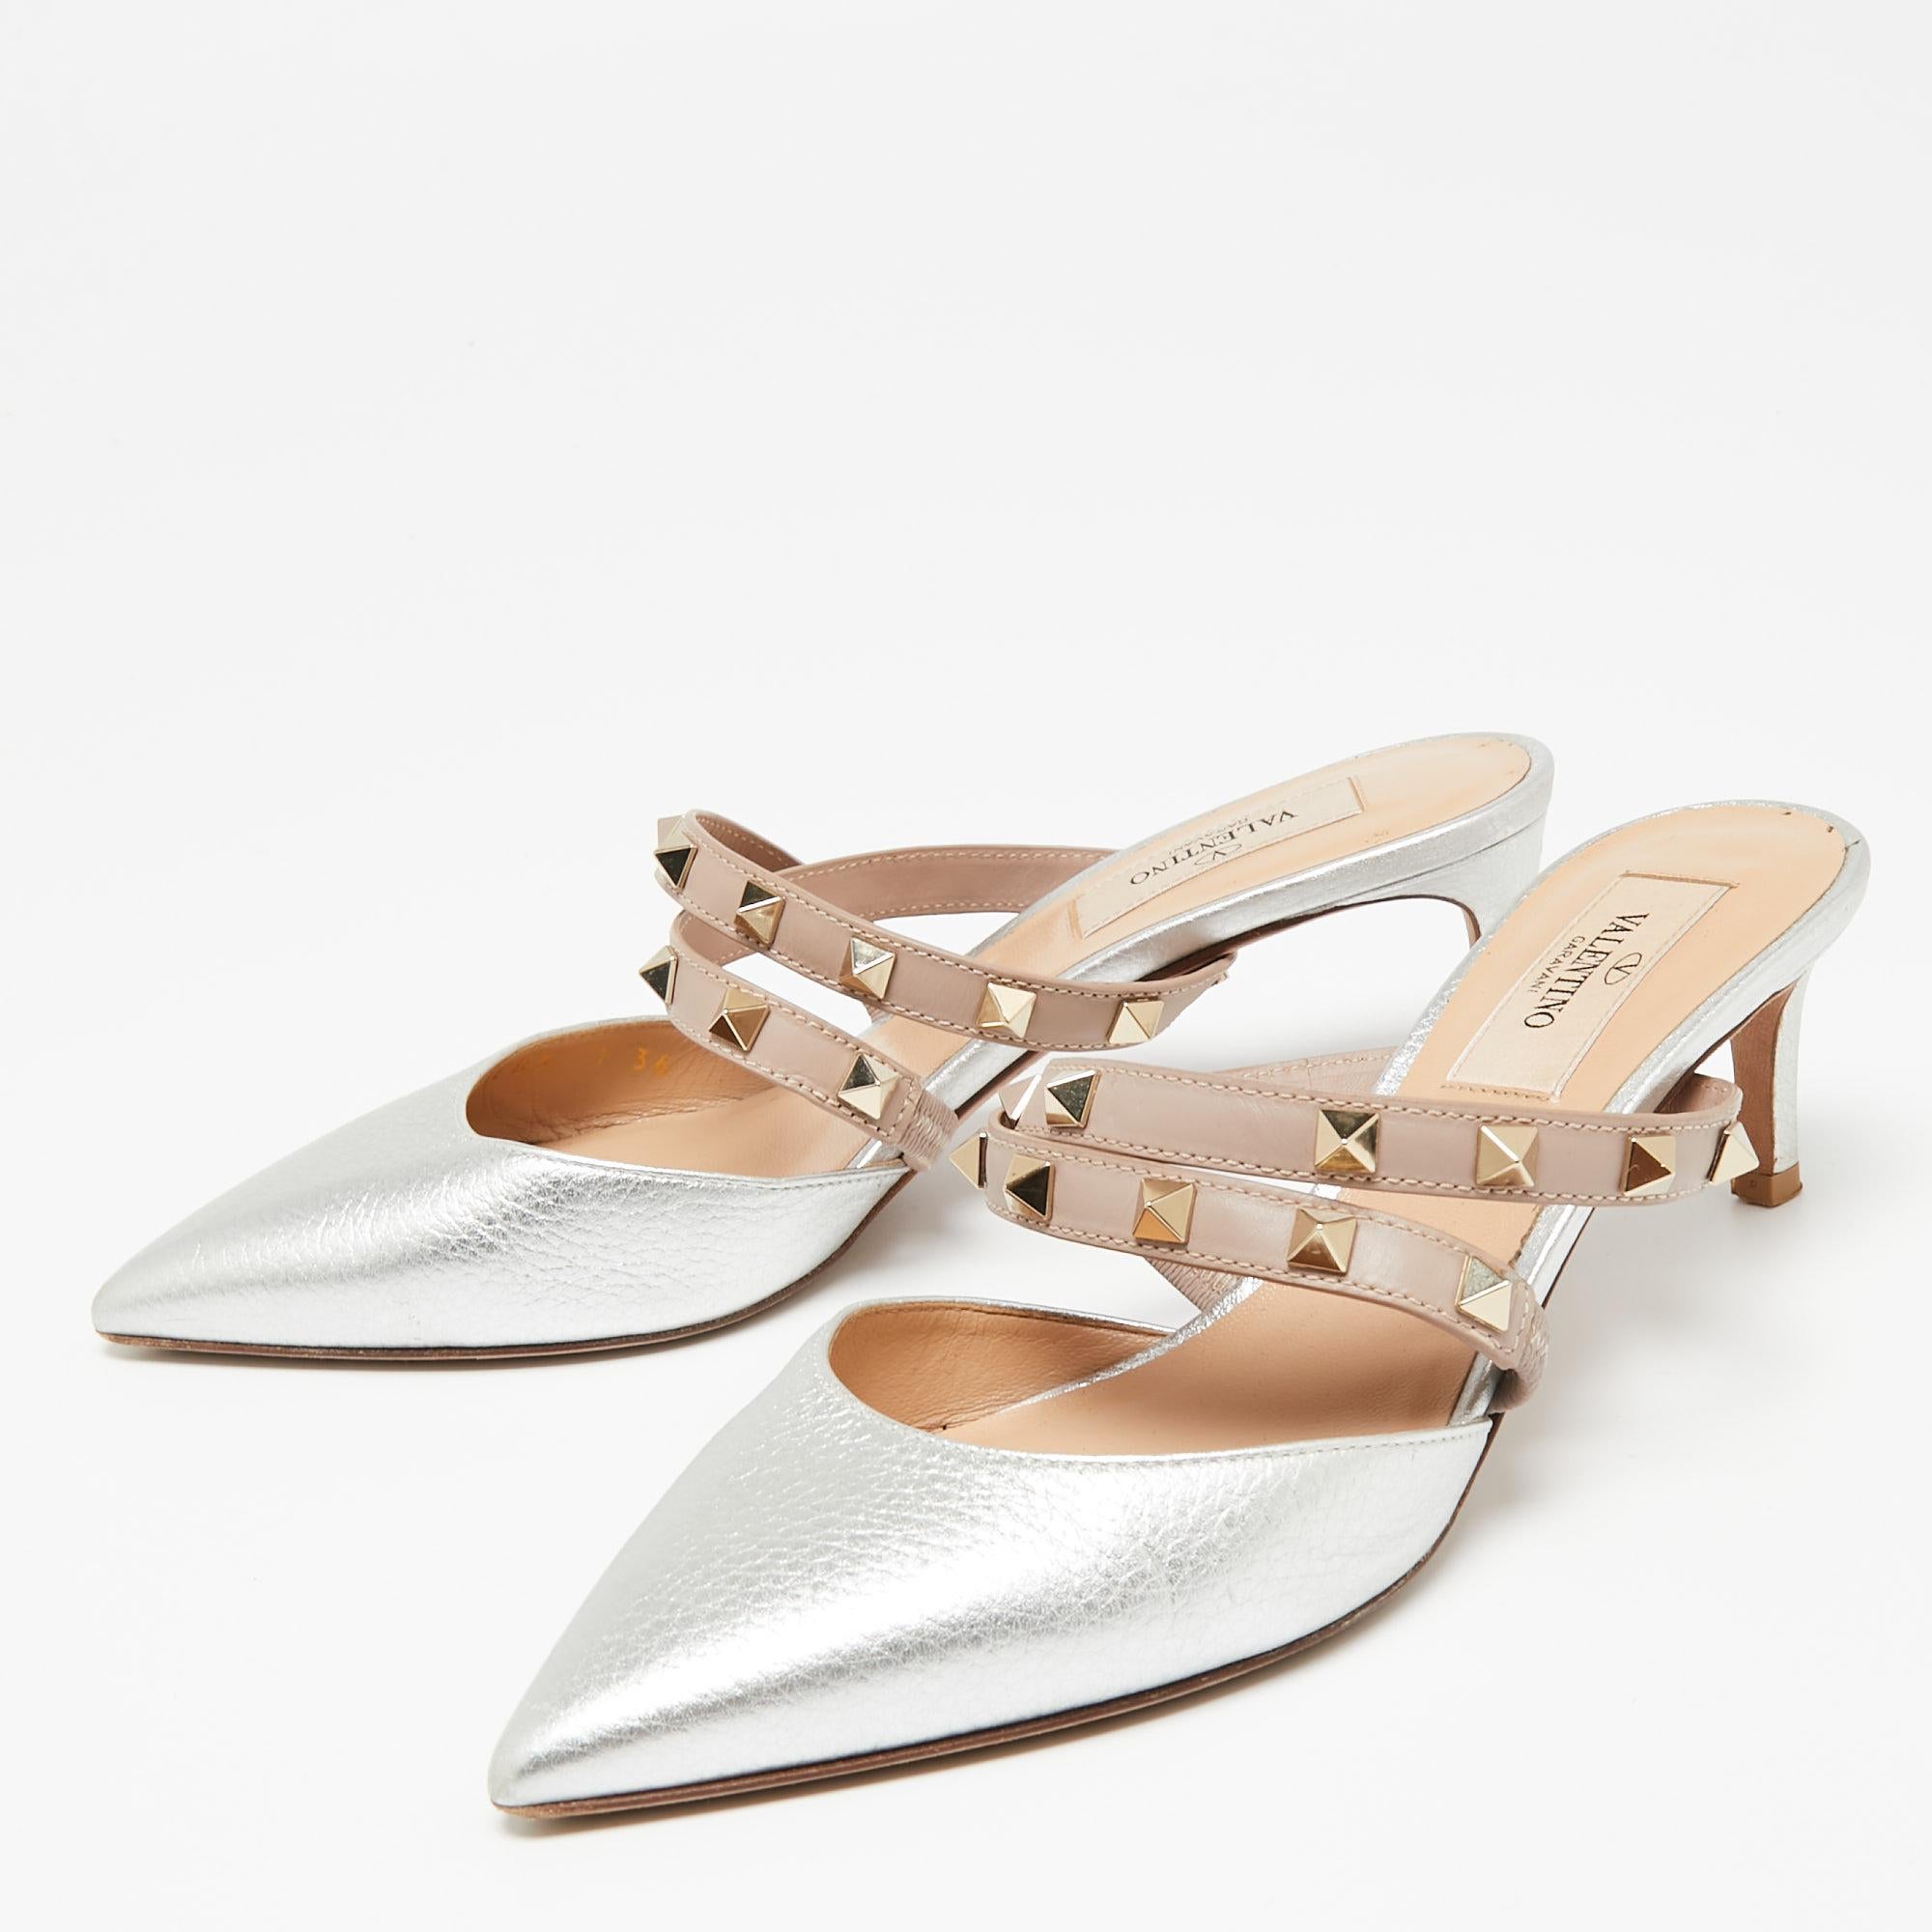 The addition of Rockstuds on the straps of these Valentino sandals leads to instant brand identification. Made from leather, it embodies an elegant color contrast and flaunts 5.5cm heels.

